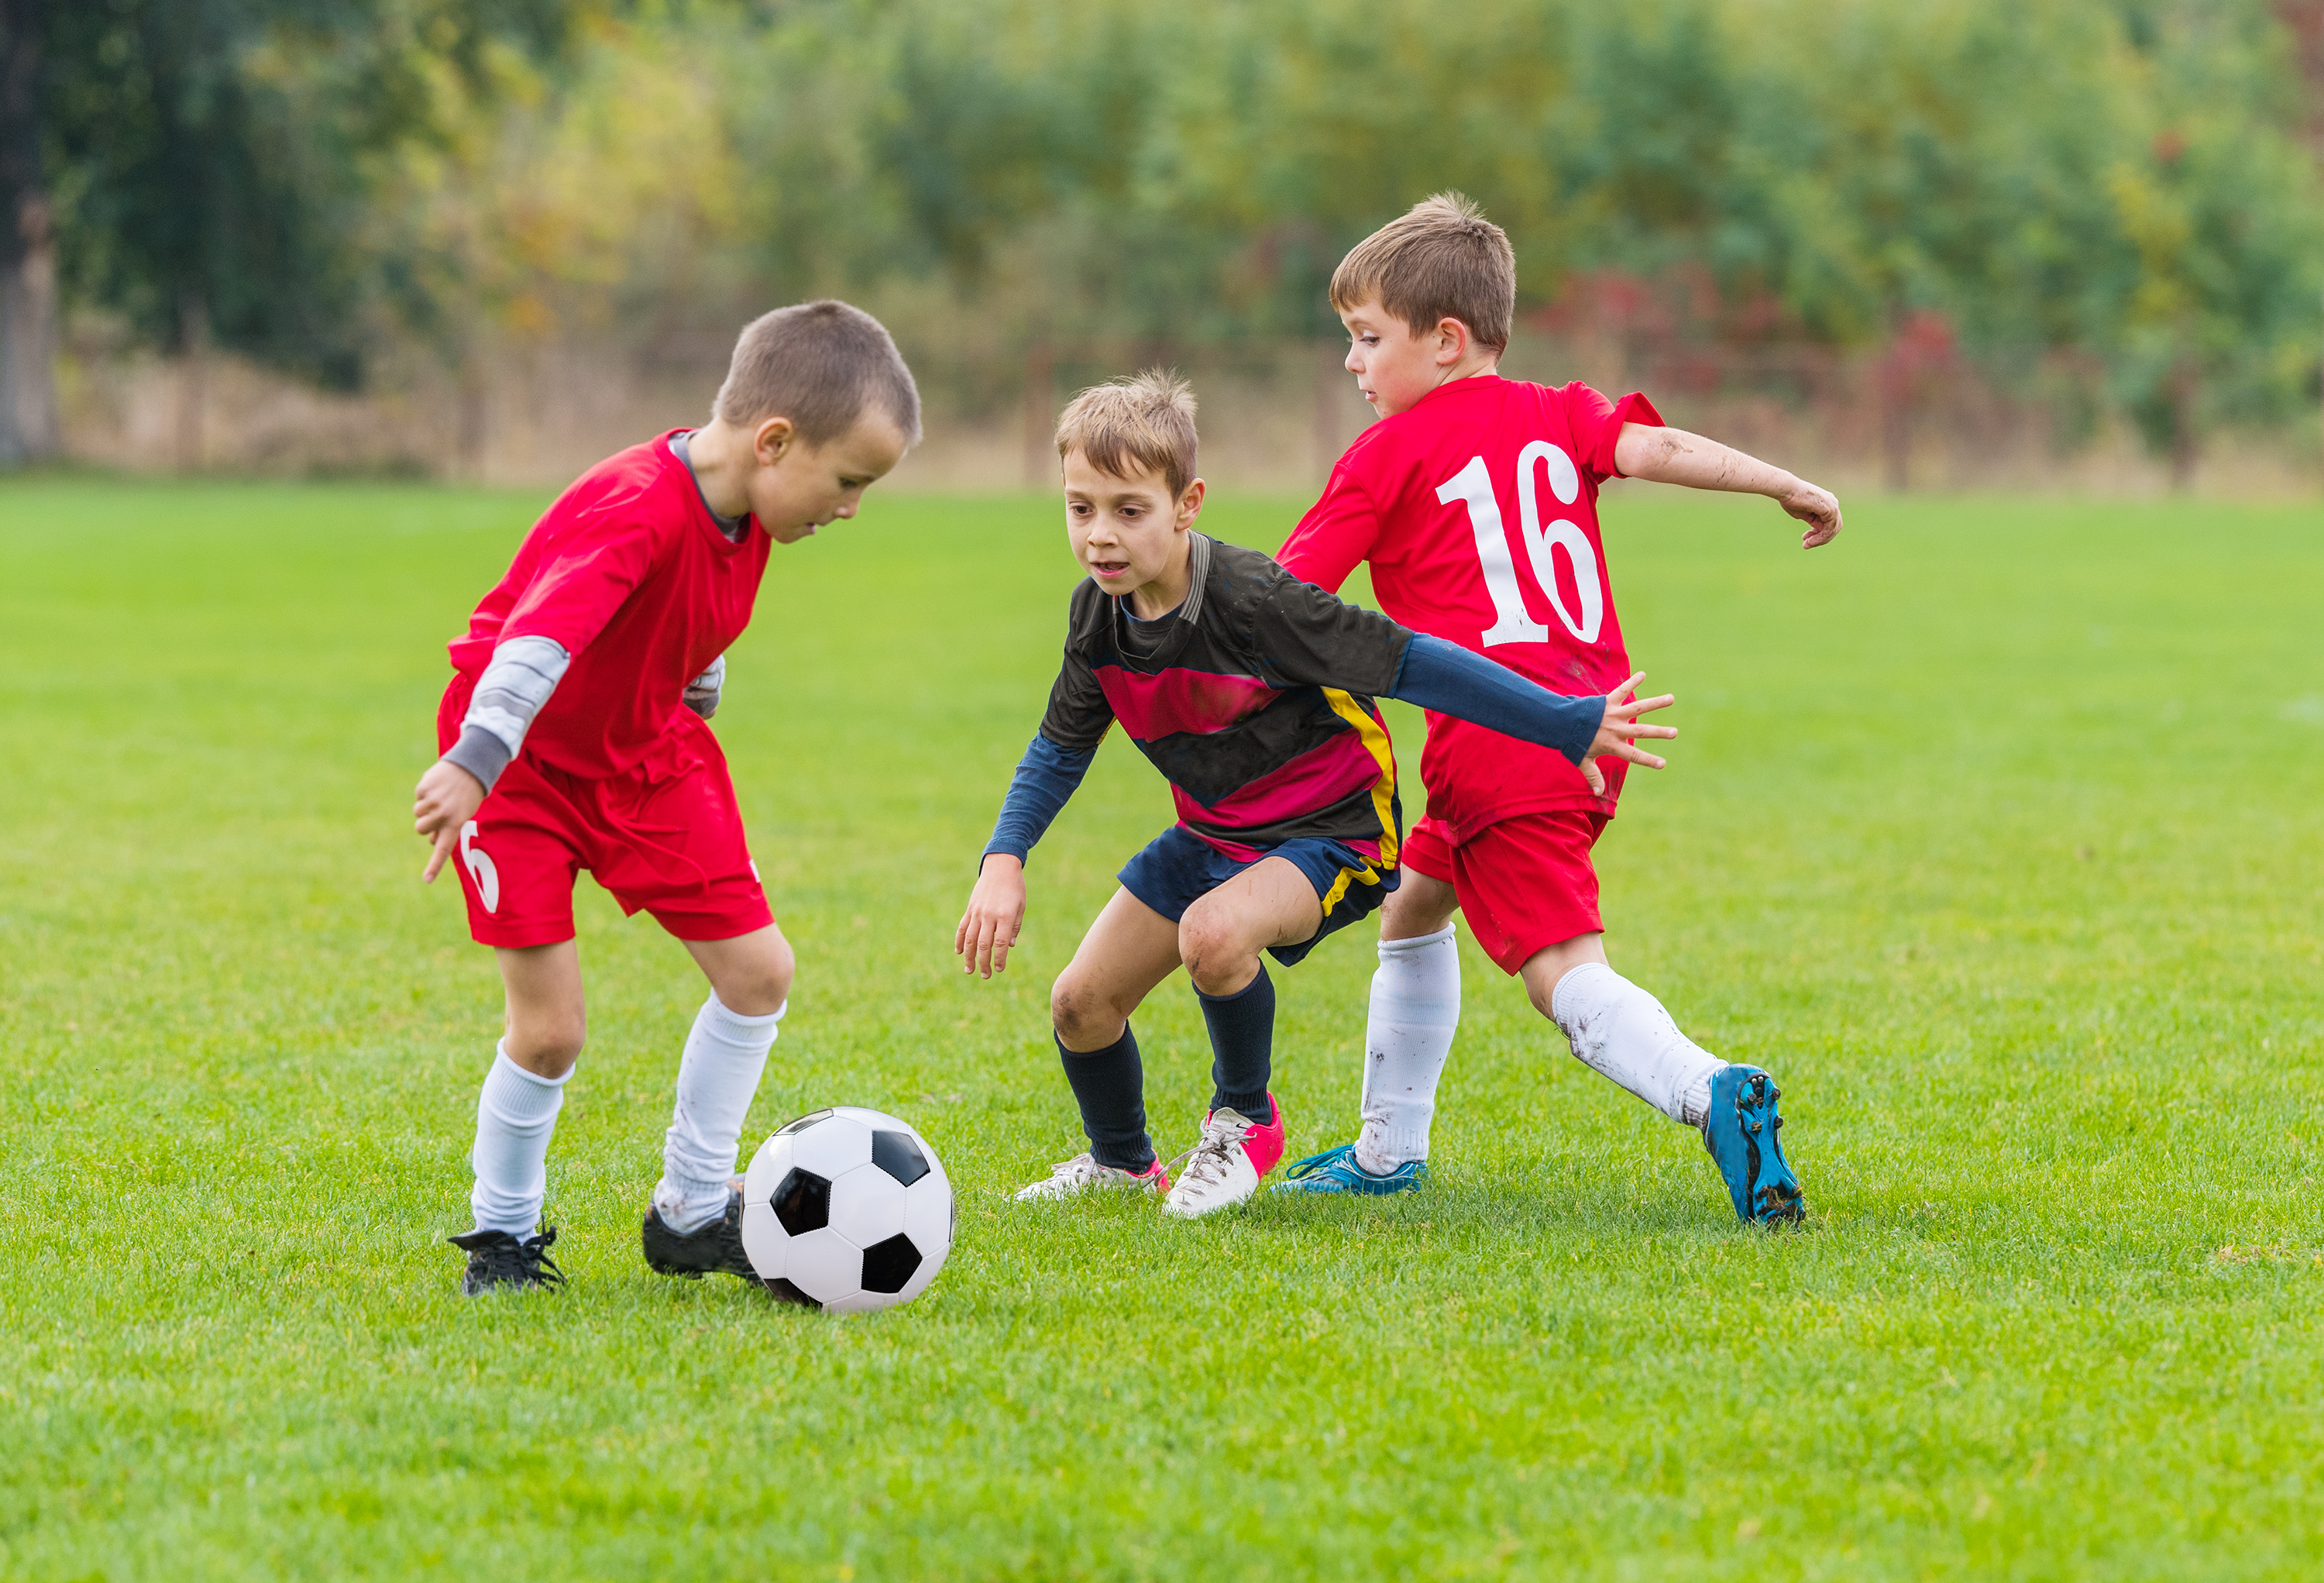 Boys kicking soccer ball on the sports field. (Getty Images)